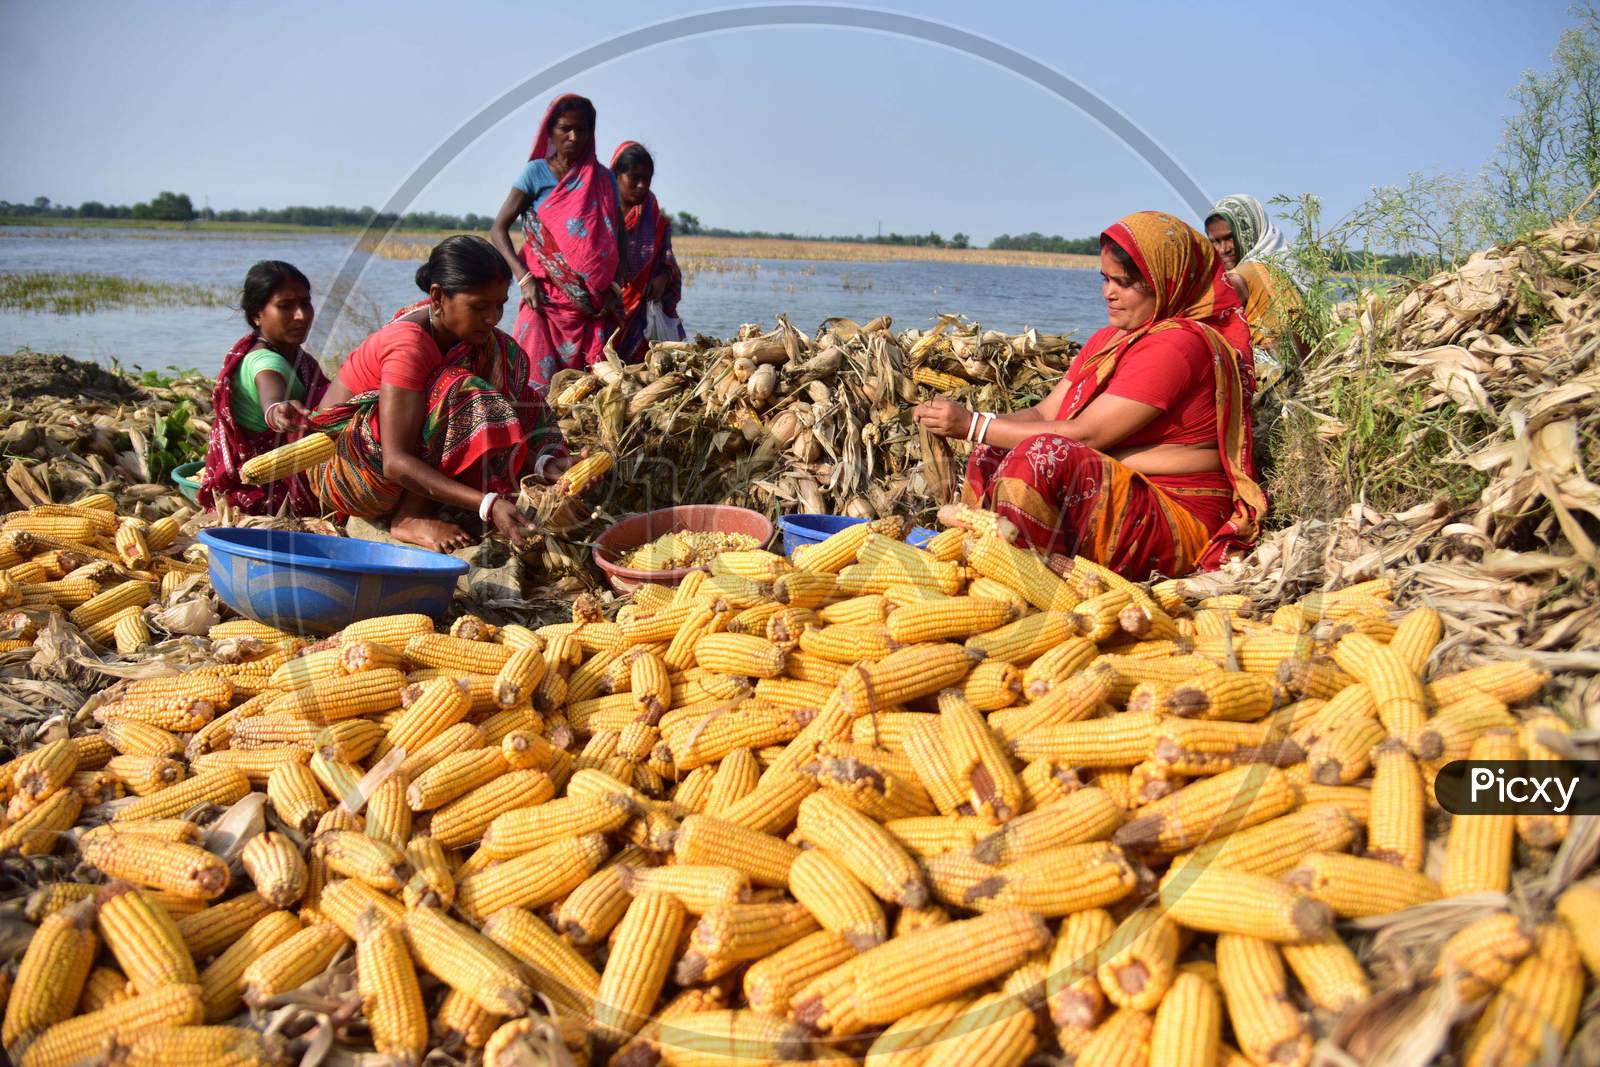 Indian Women Peeling Off The Maize After Harvesting  In Morigaon District Of Assam ,India  On June 5,2020